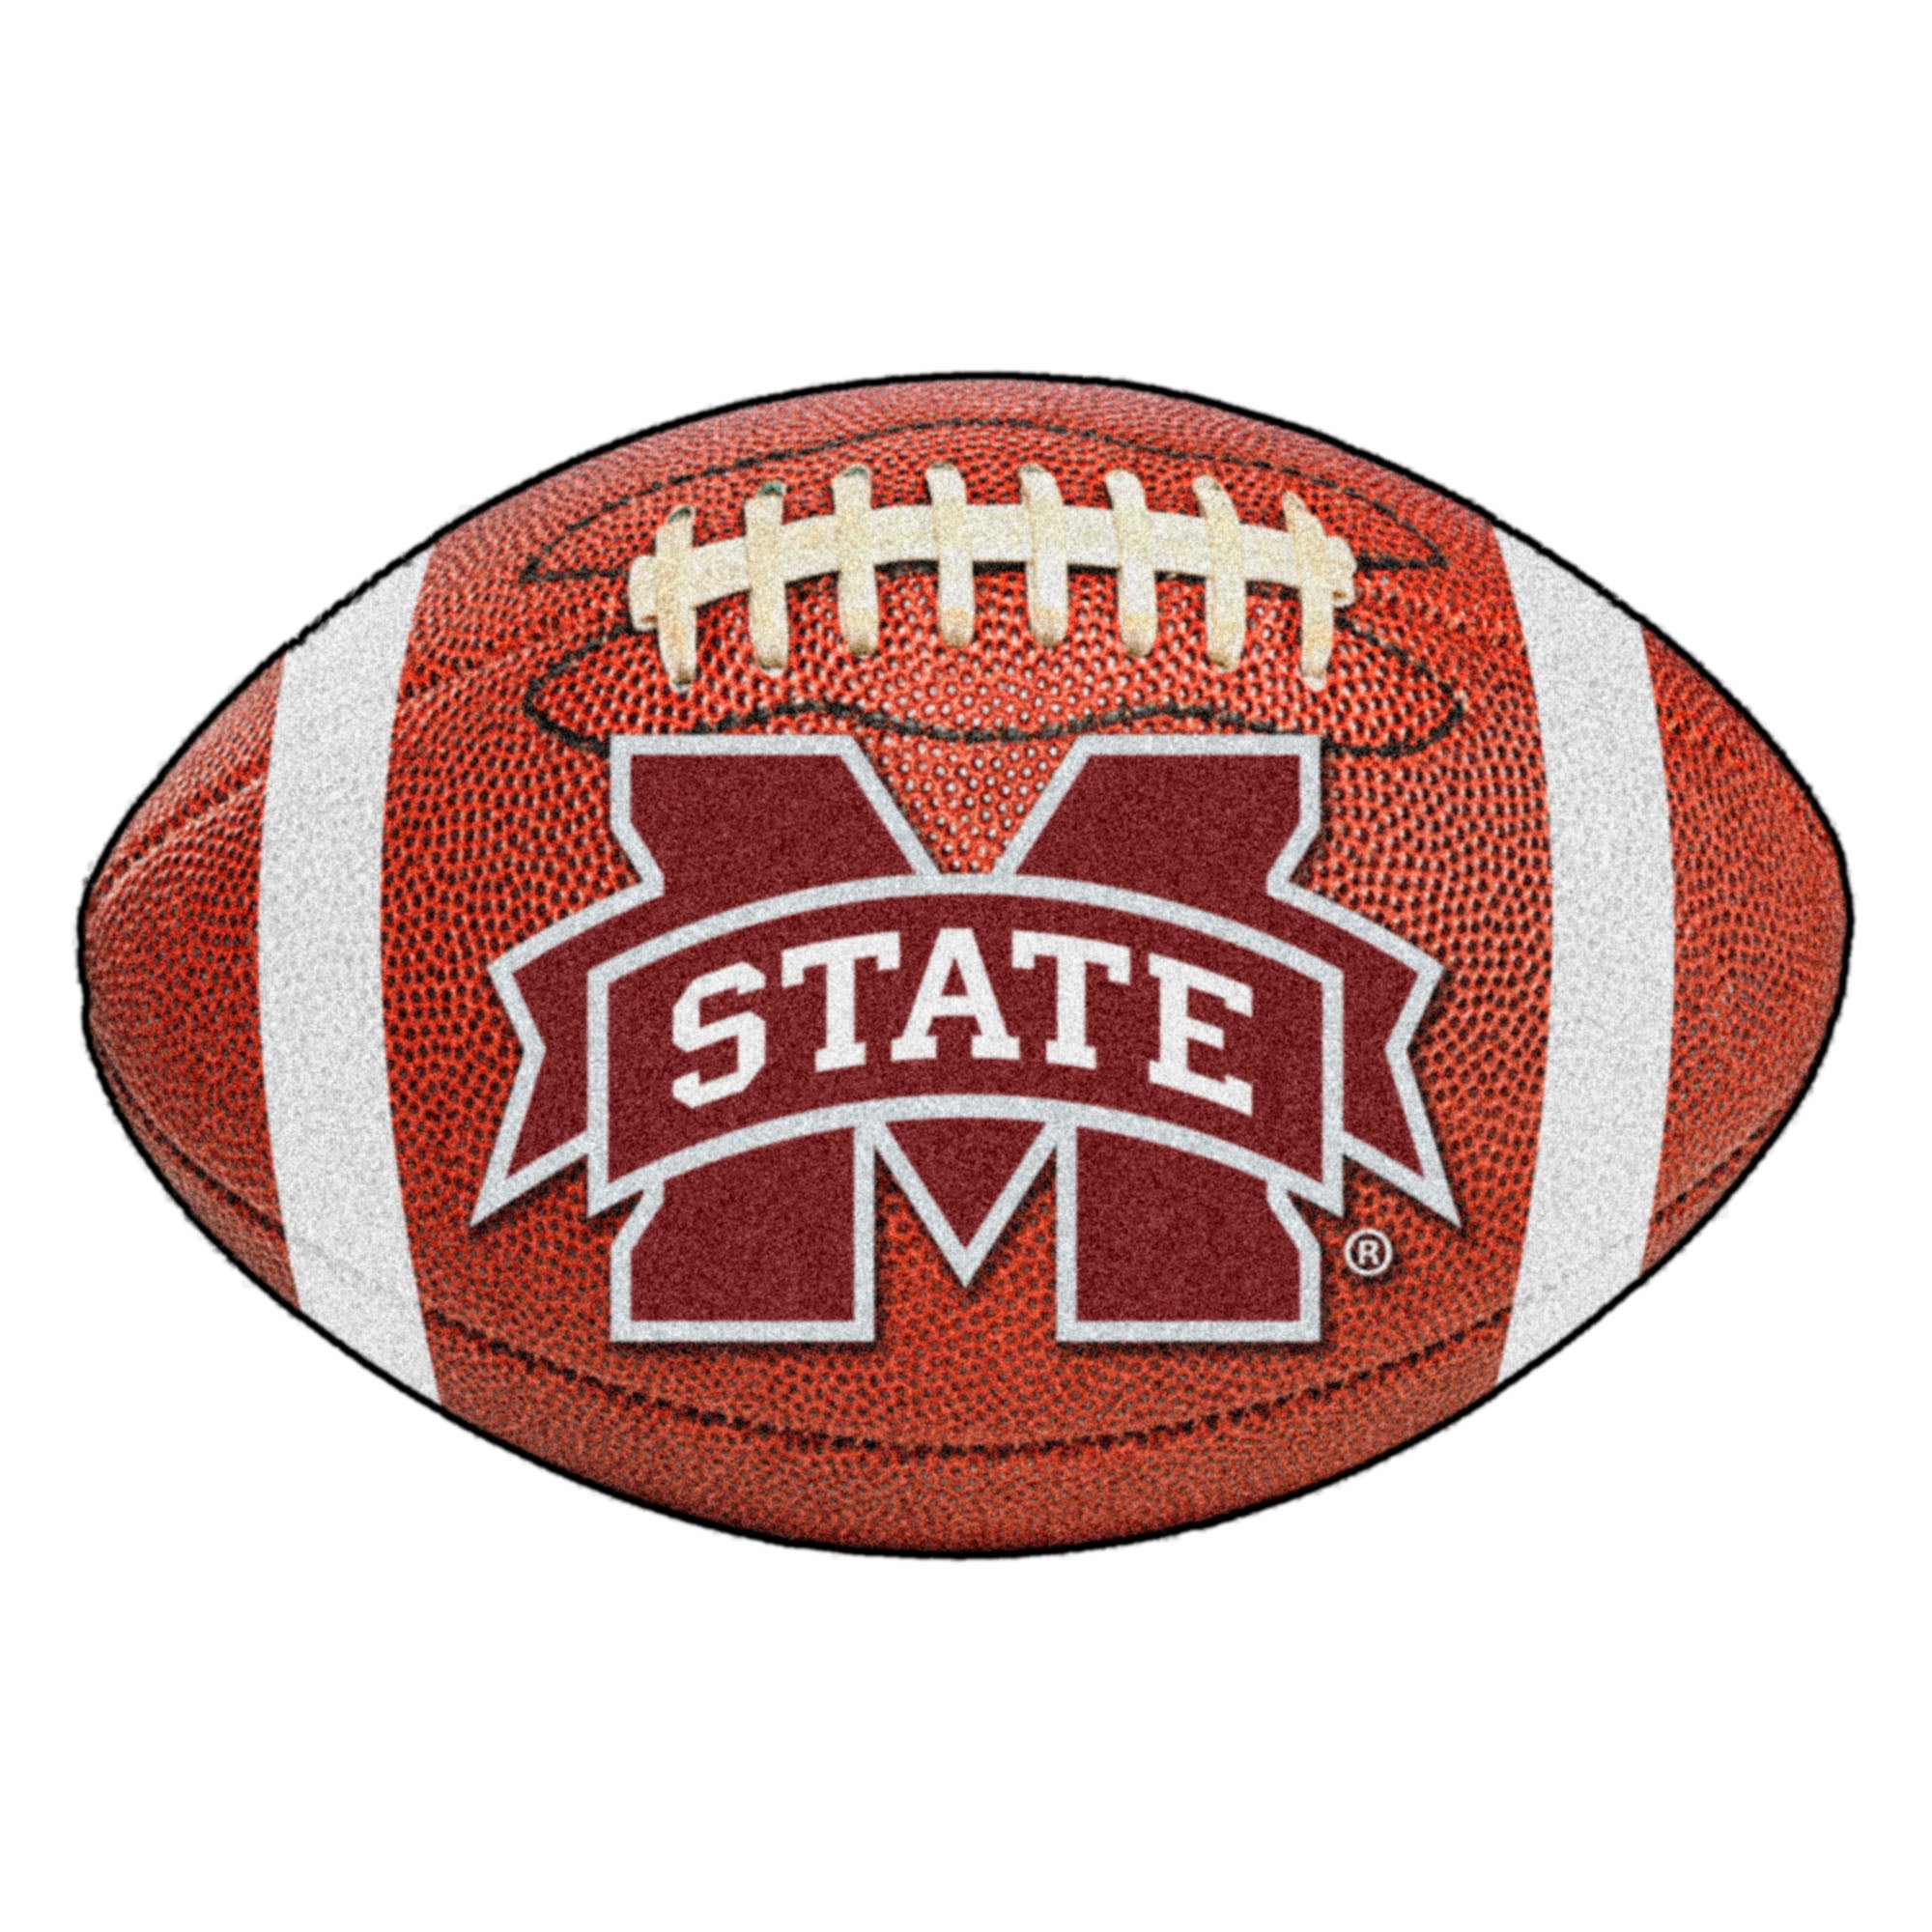 FANMATS, Mississippi State University Football Rug - 20.5in. x 32.5in.